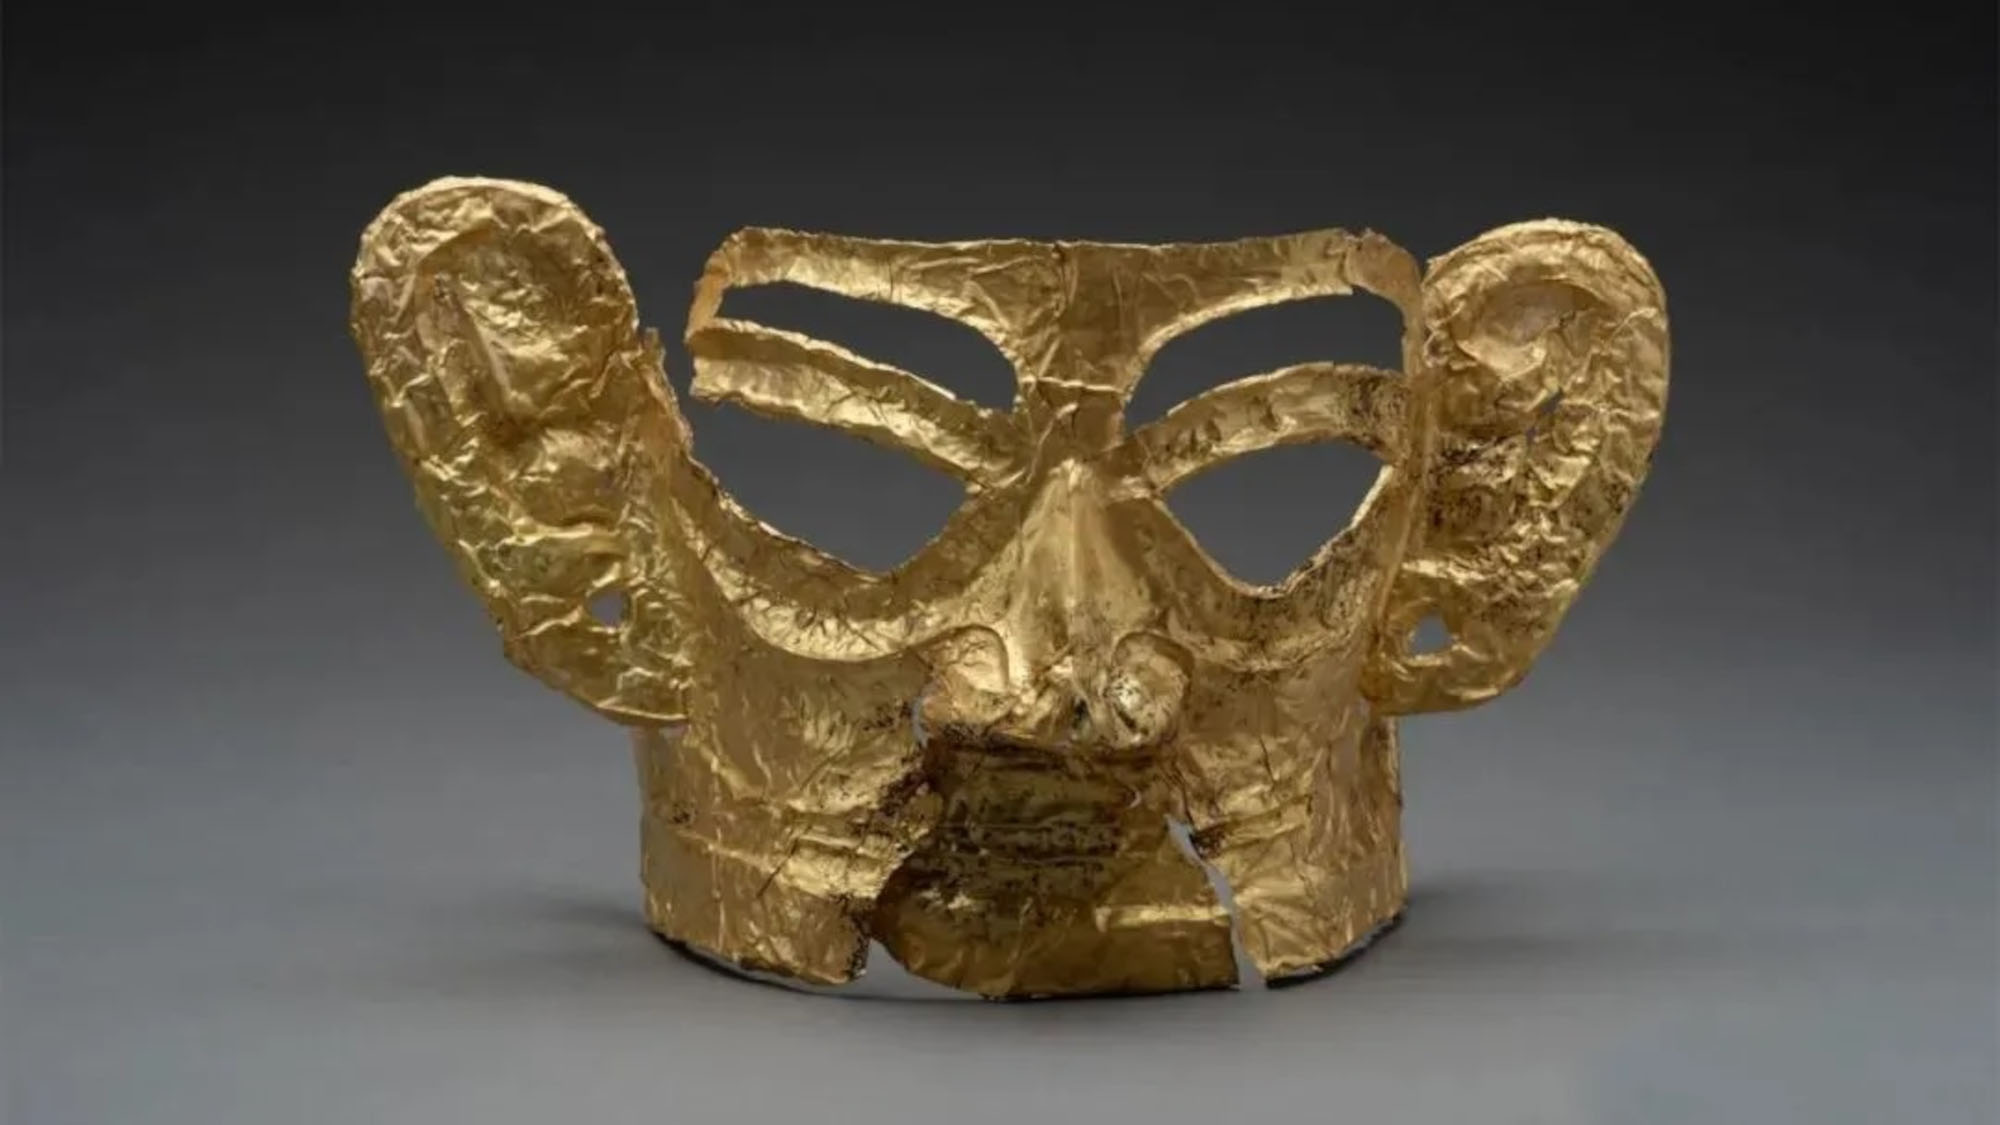 Read more about the article Largest Golden Mask Ever After 3,000 Year Old Artefact Unearthed In Ancient Chinese Sacrifice Pit